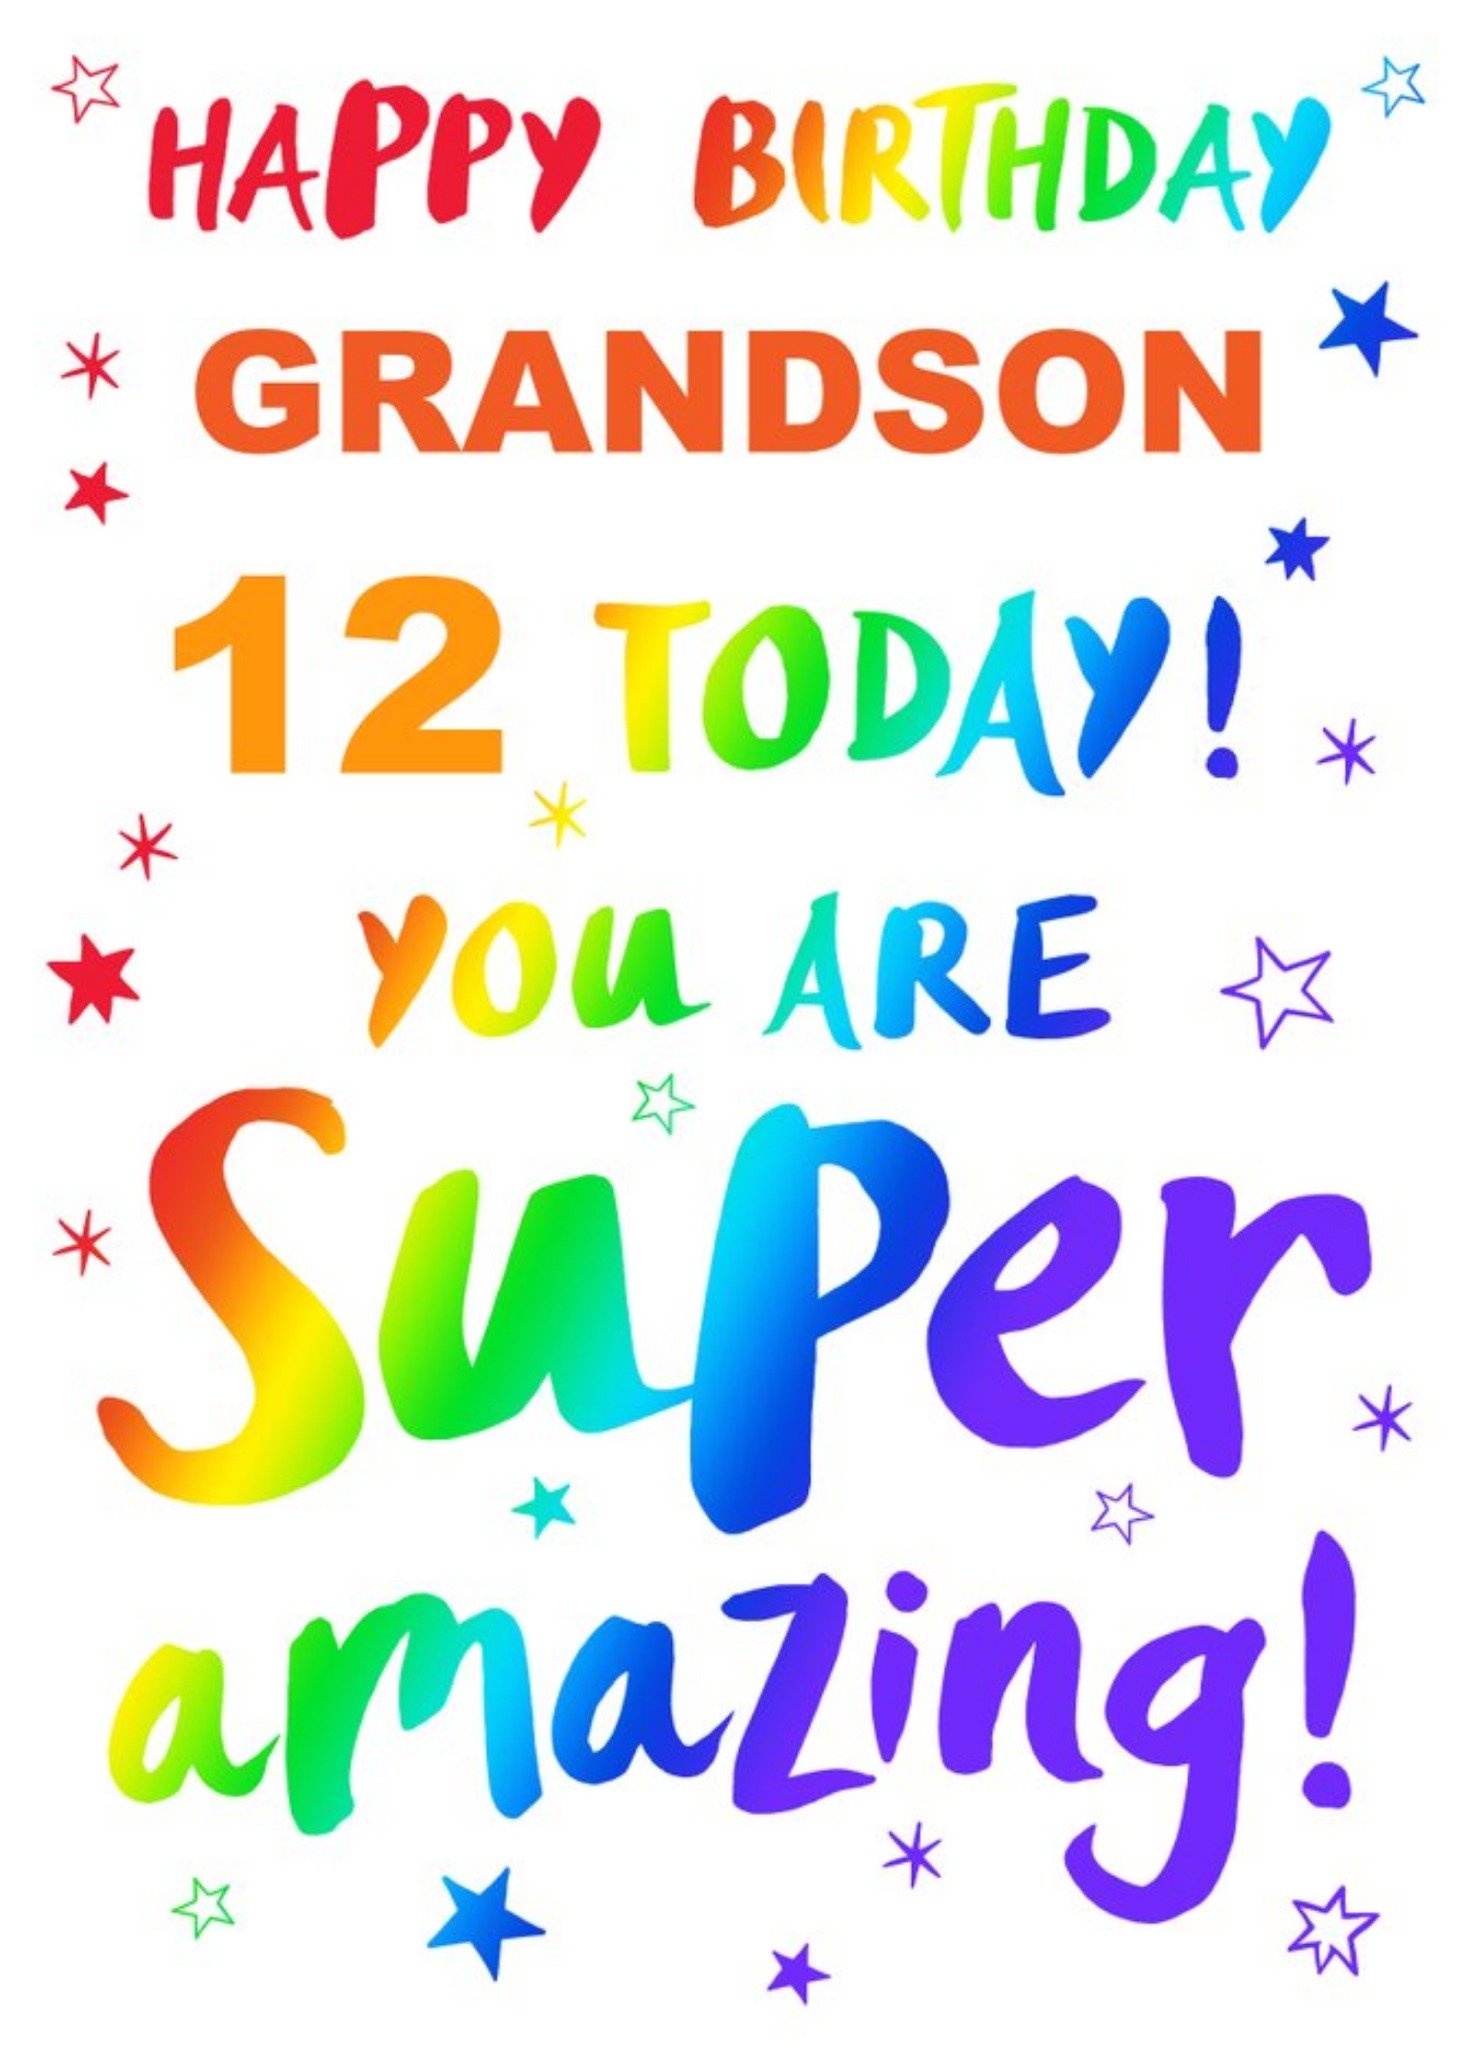 Moonpig Happy Birthday Grandson 12 Today You Are Super Amazing Card Ecard